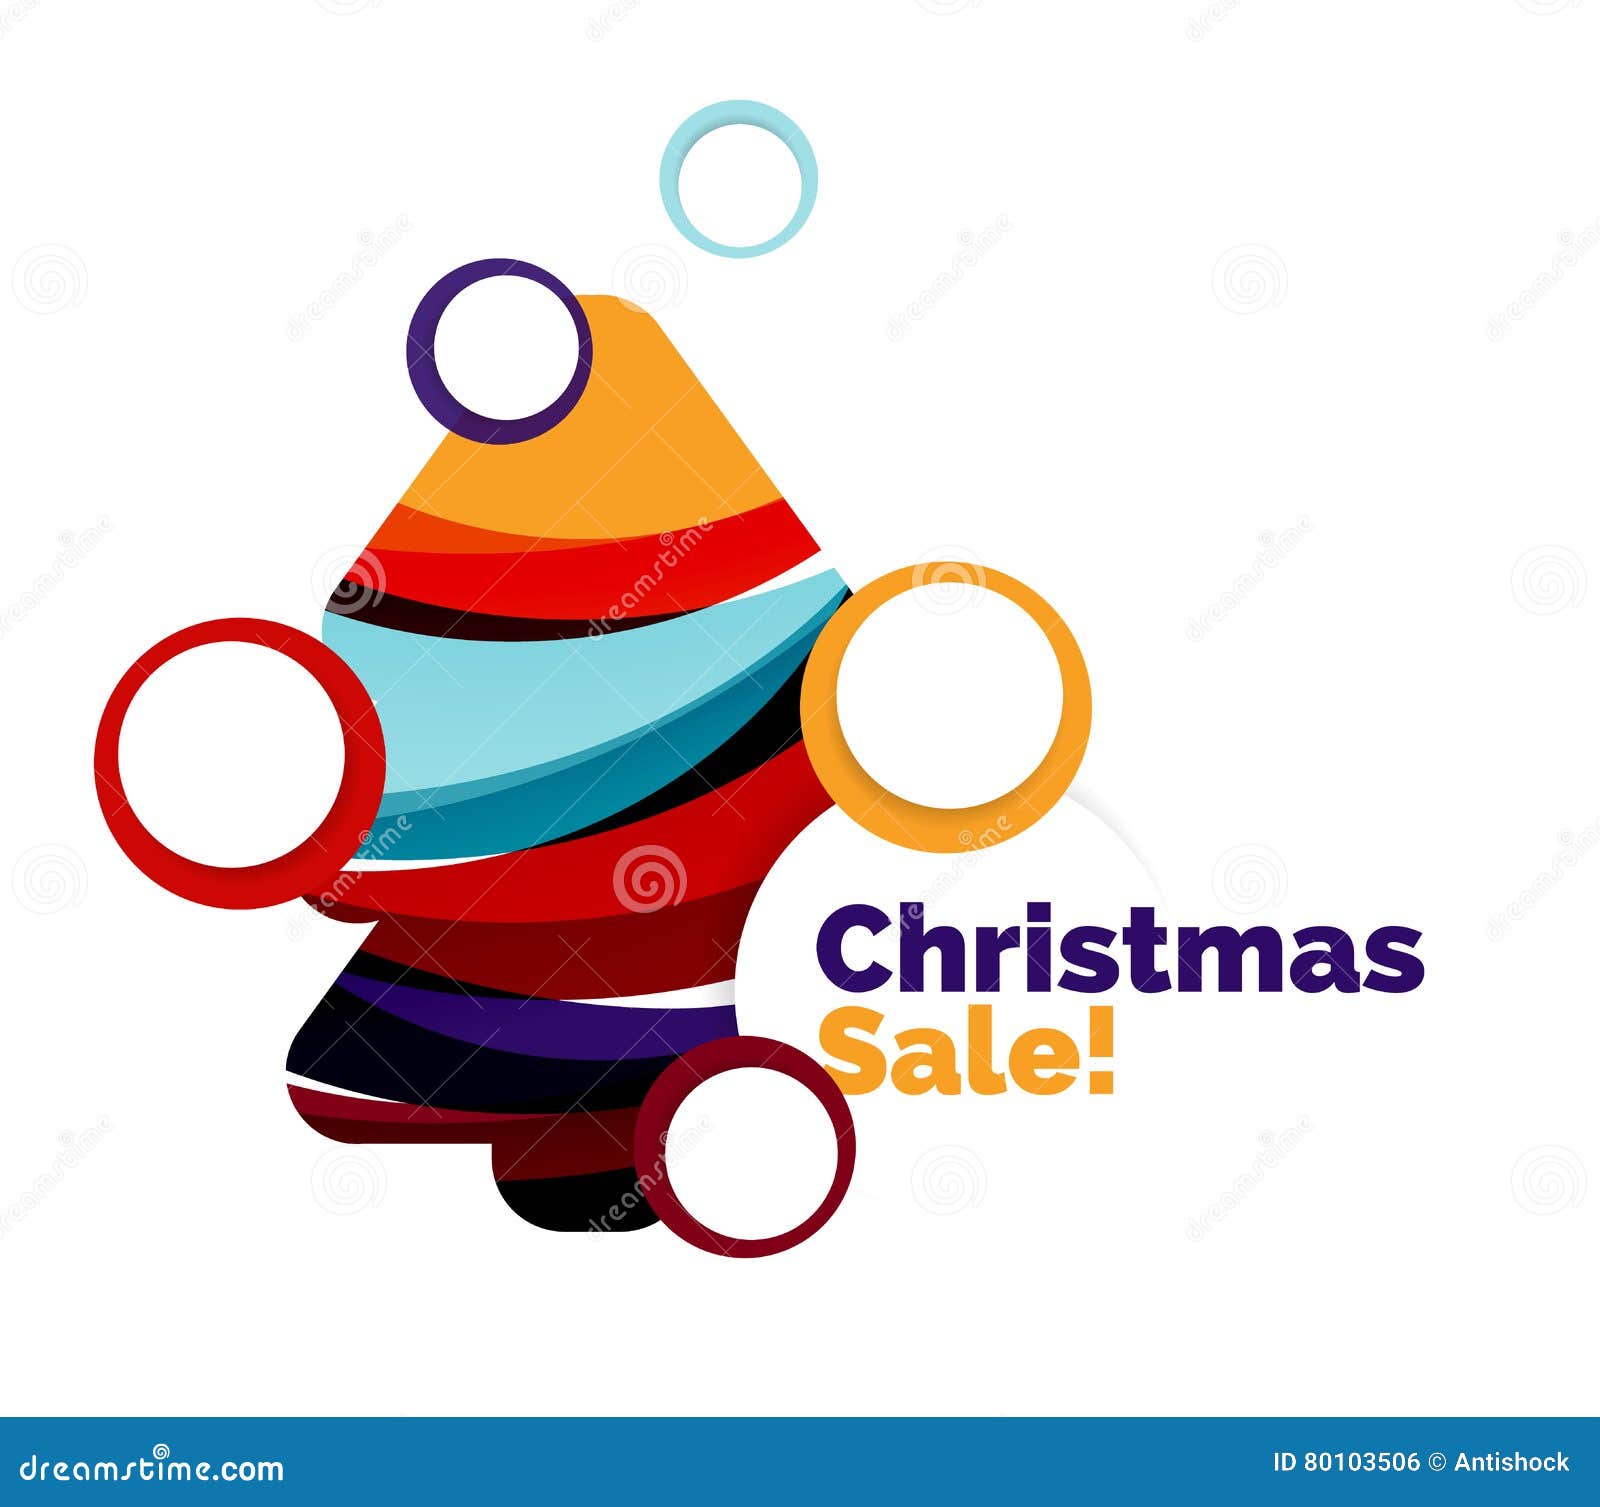 Christmas Banner with Baubles Stock Vector - Illustration of winter ...